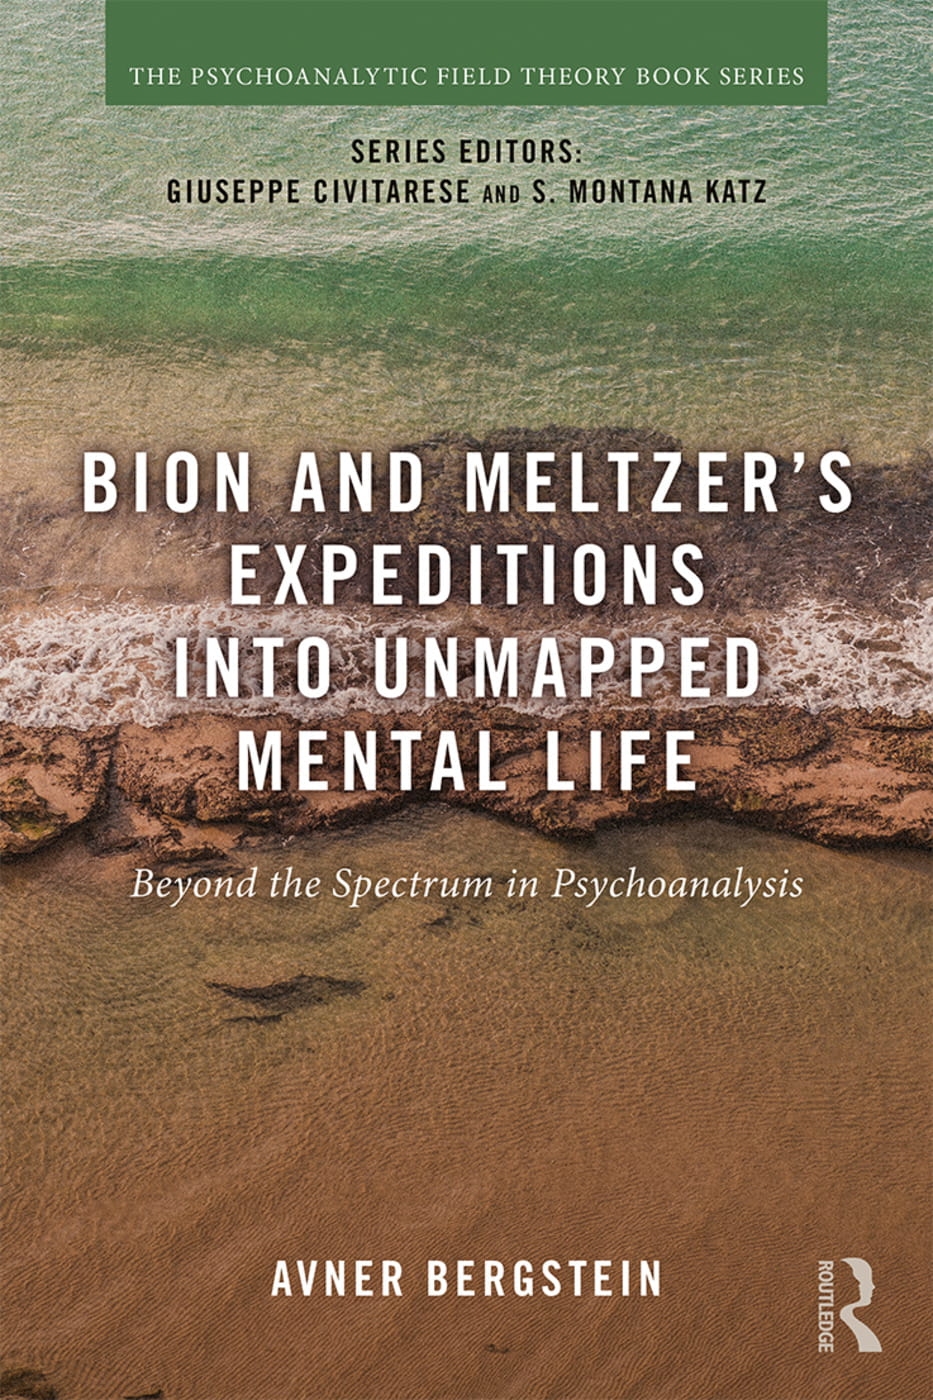 Bion and Meltzer’s Expeditions Into Unmapped Mental Life: Beyond the Spectrum in Psychoanalysis